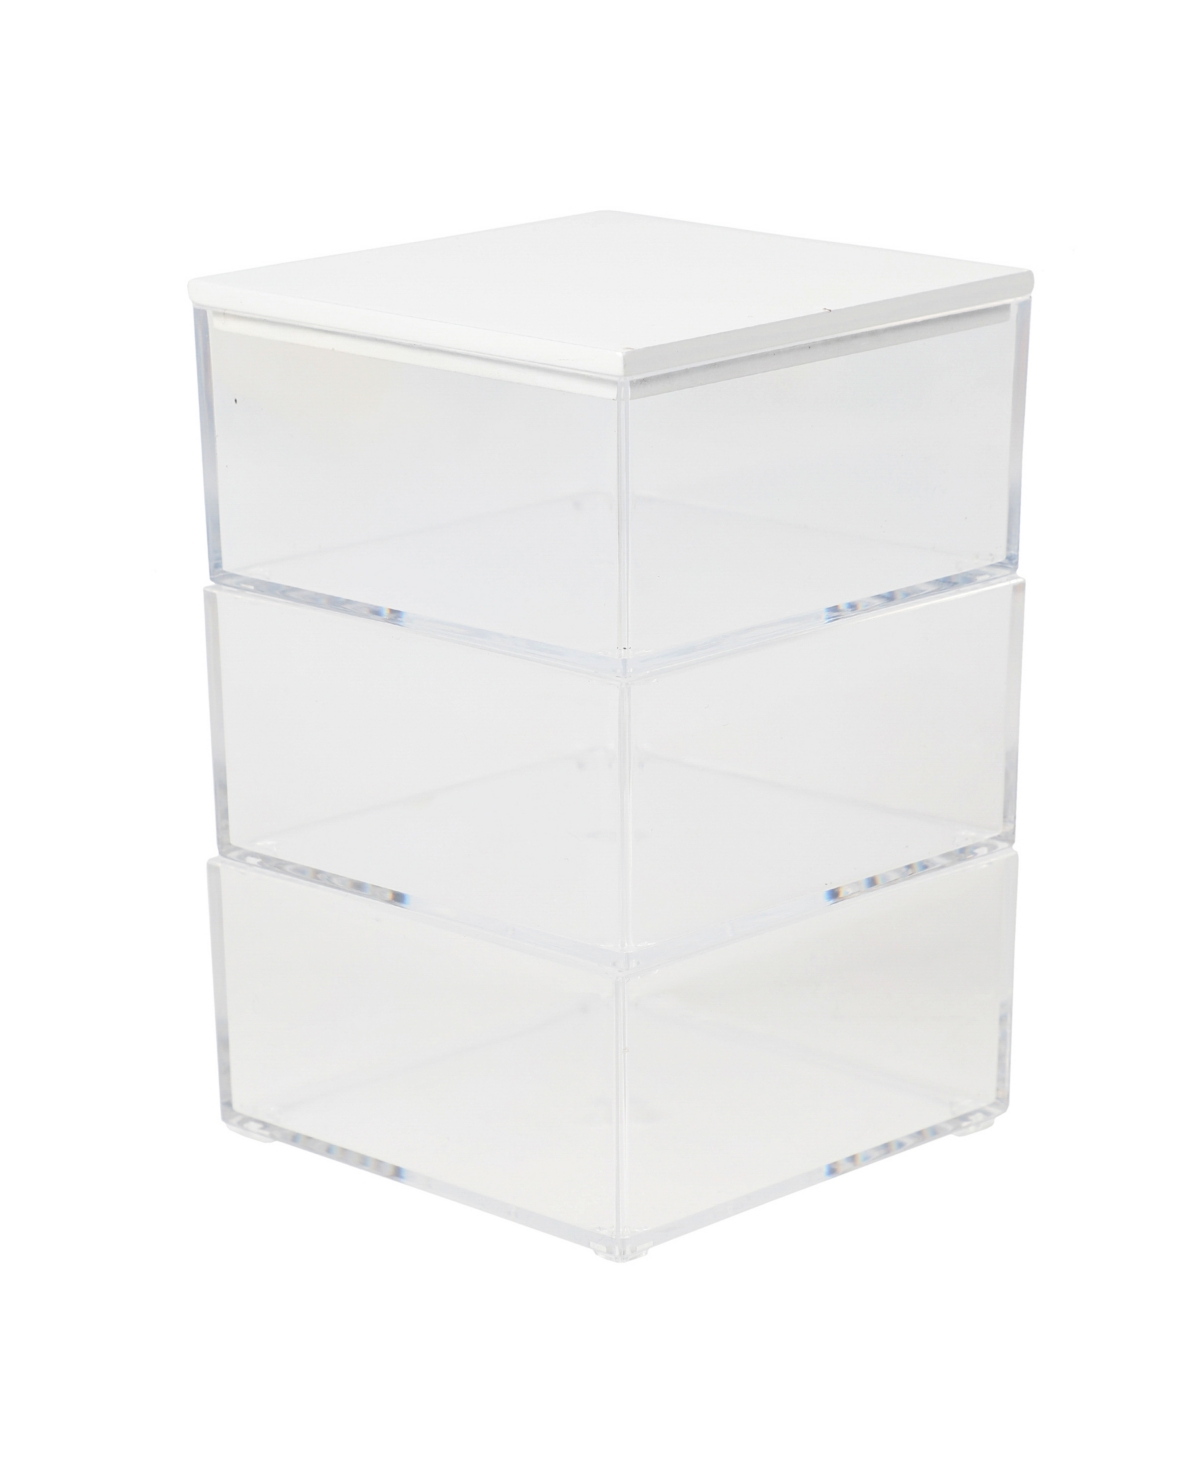 Brody Plastic Storage Organizer Bins with Engineered Wood Lid for Home Office, Kitchen or Bathroom, 3 Pk Small, 3.75" x 3" - Clear, Whi